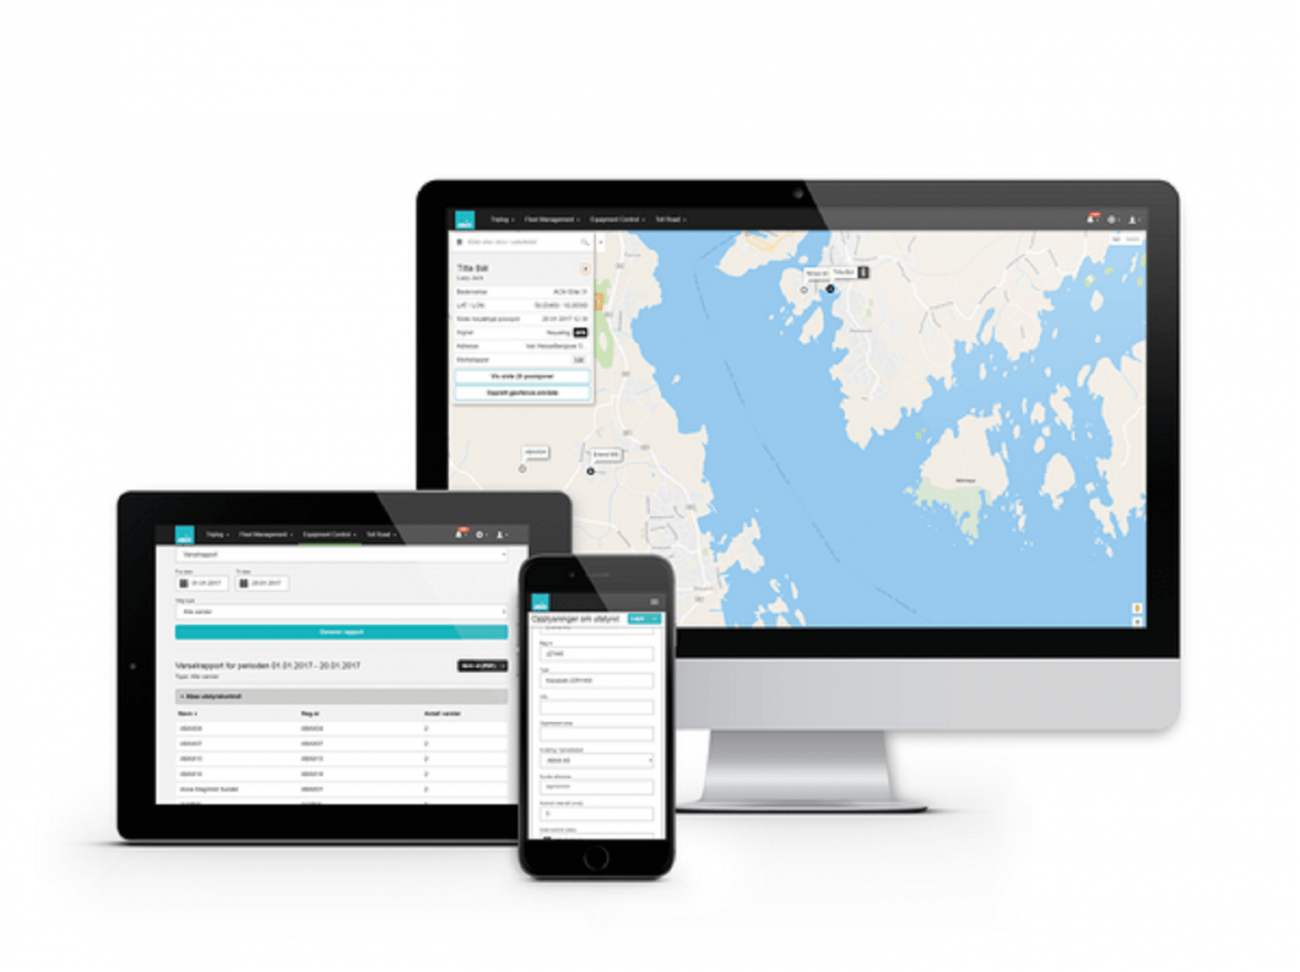 Interface of the ABAX Fleet Management system 